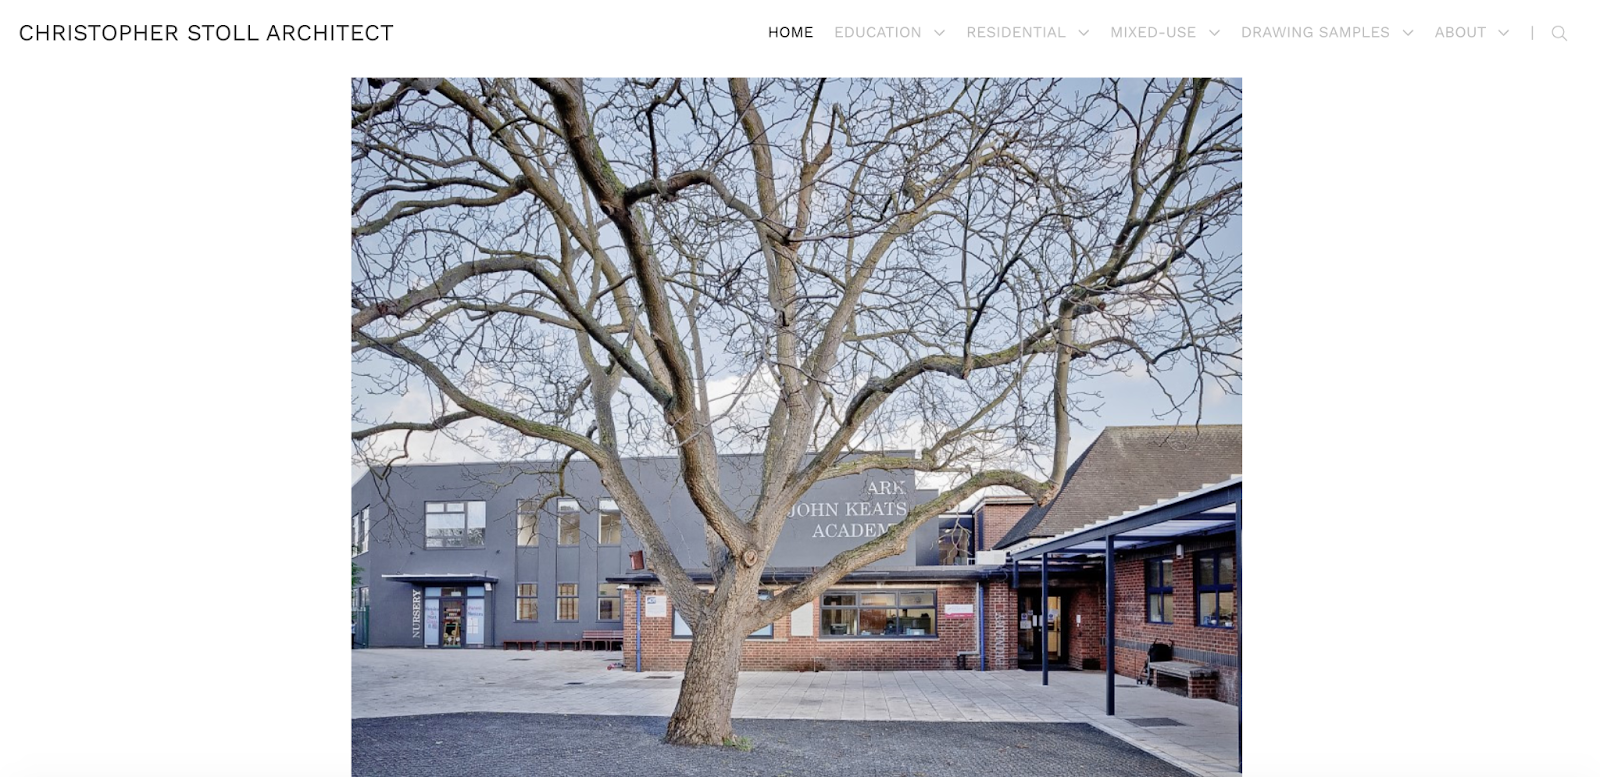 Architecture website example: Christopher Stoll